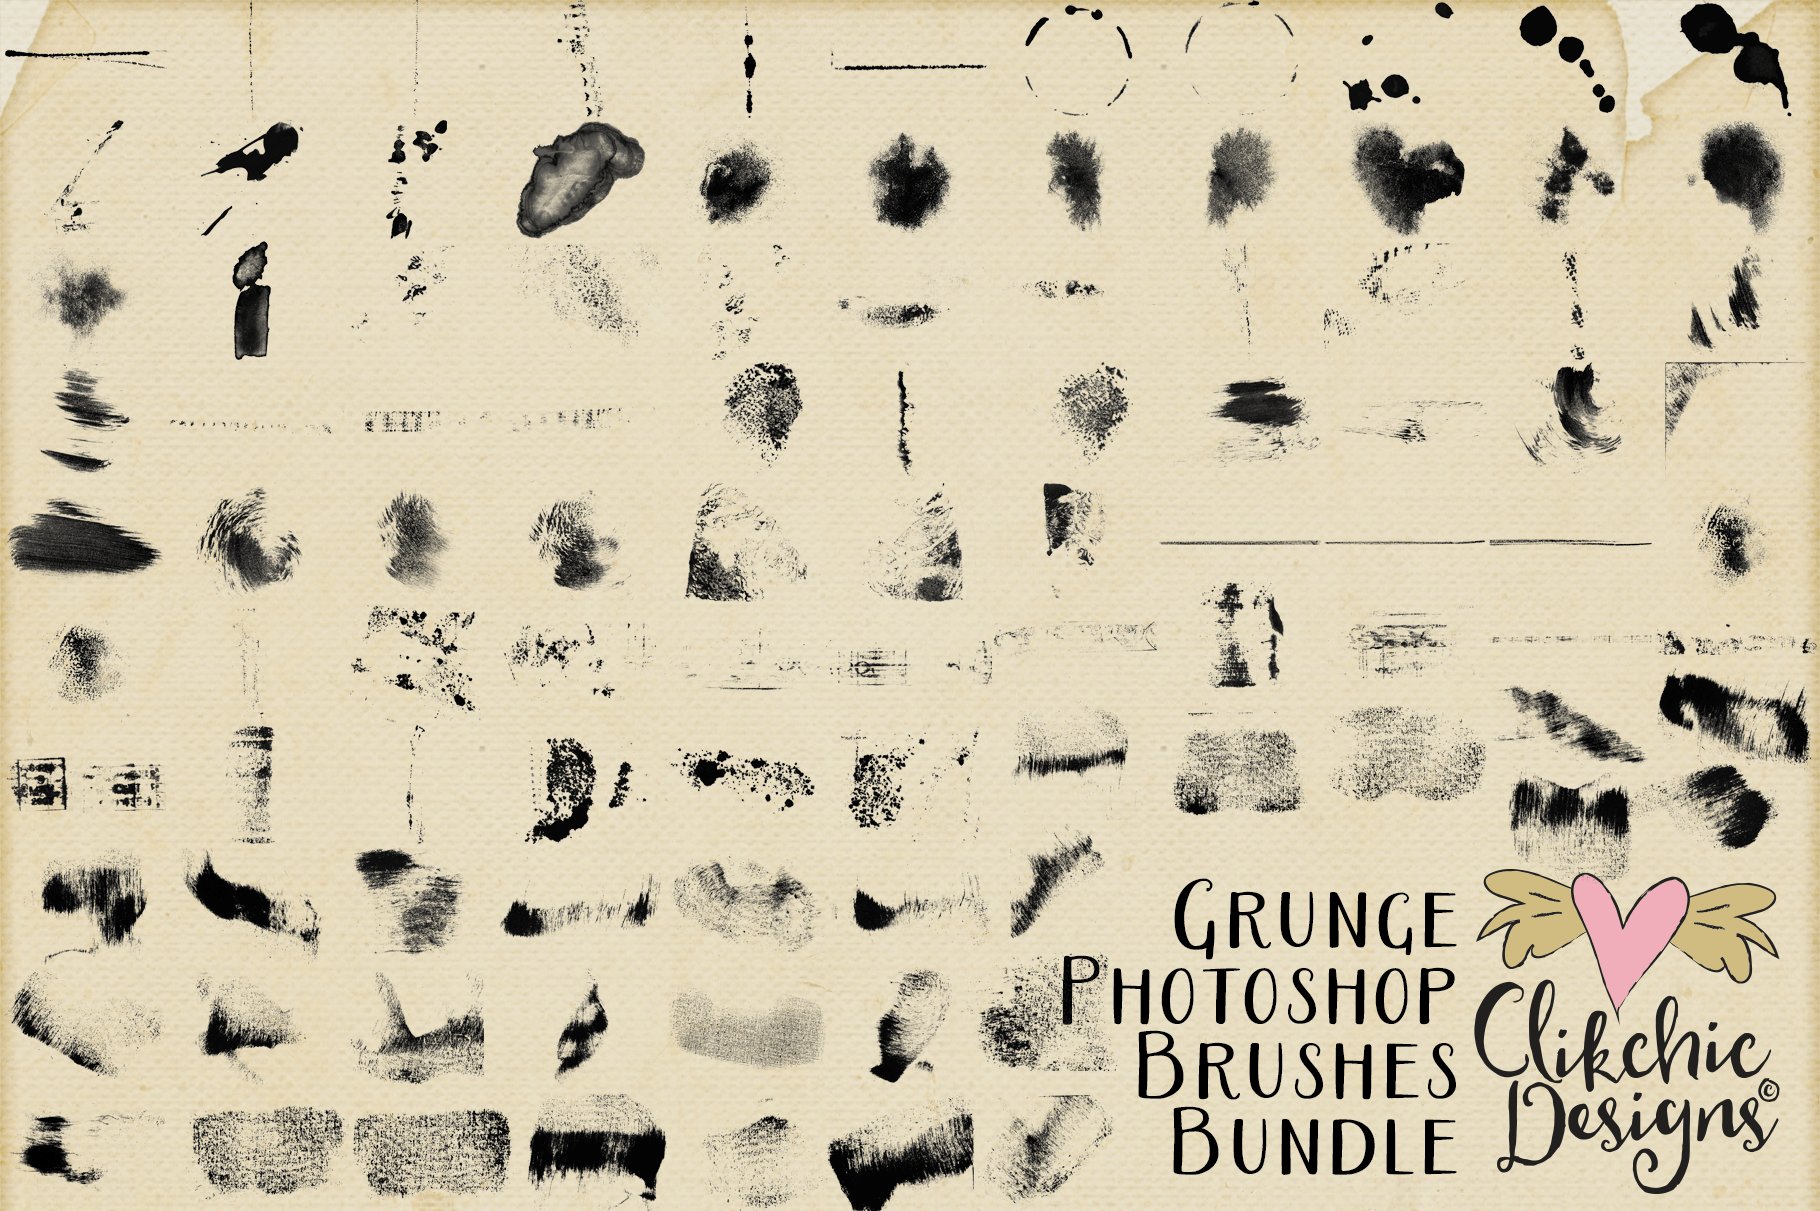 Grunge Texture Photoshop Brushes 50%preview image.